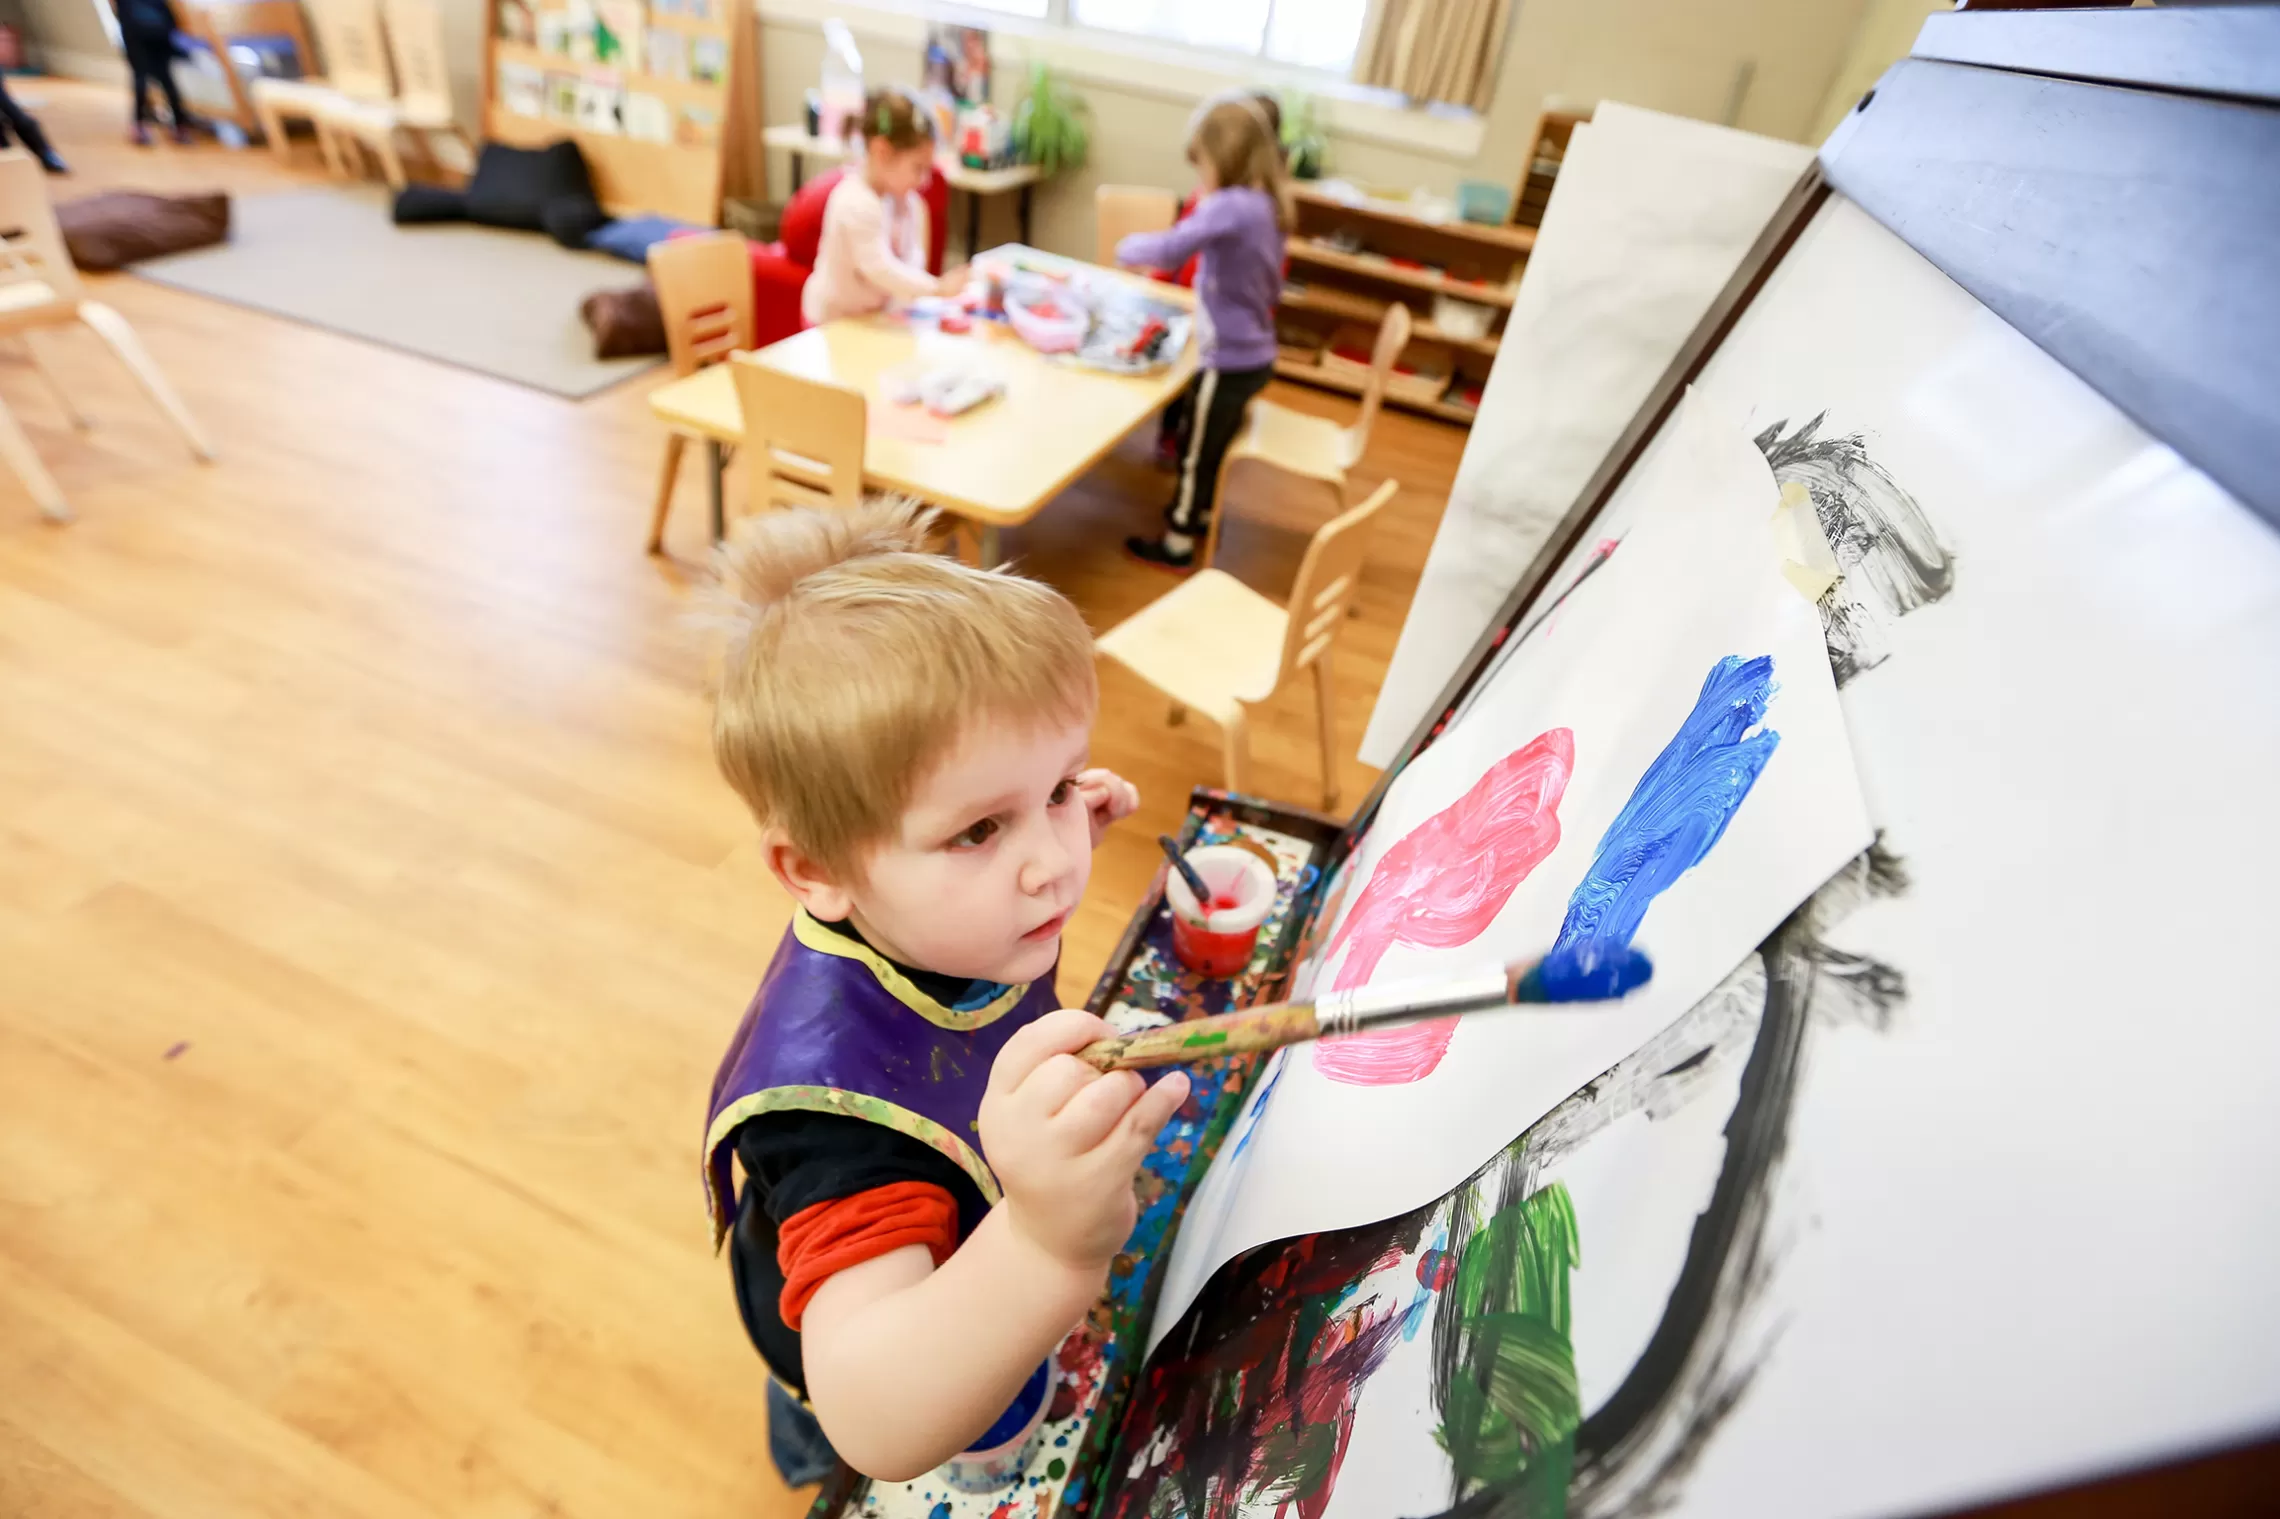 Male preschool child painting with a brush at an easel